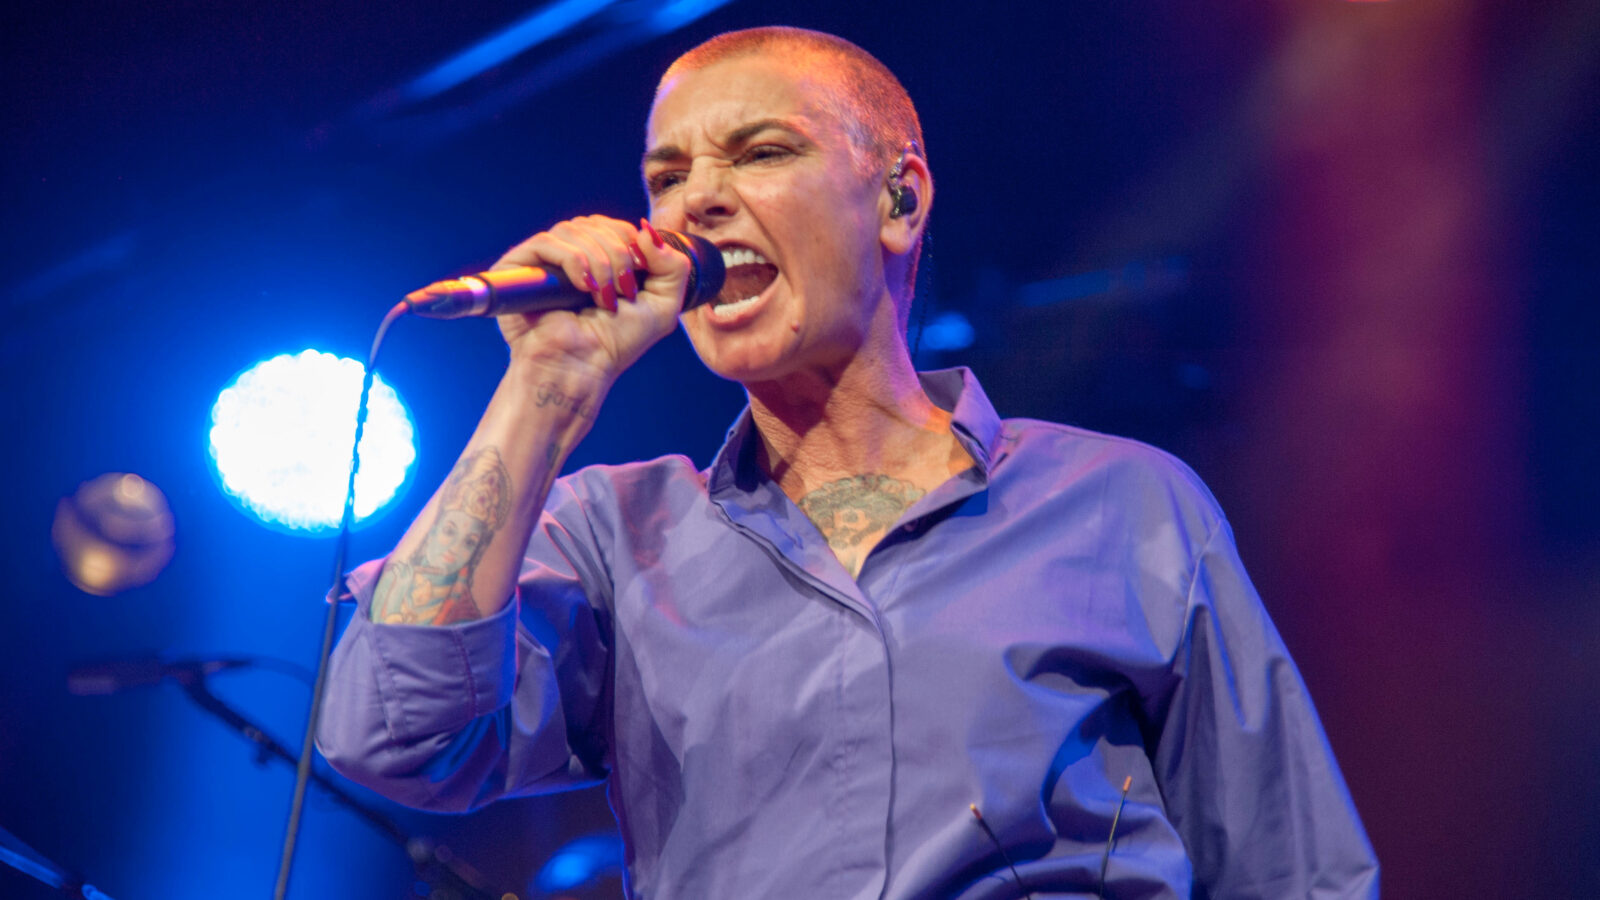 Sinéad O'Connor sings passionately into a microphone onstage